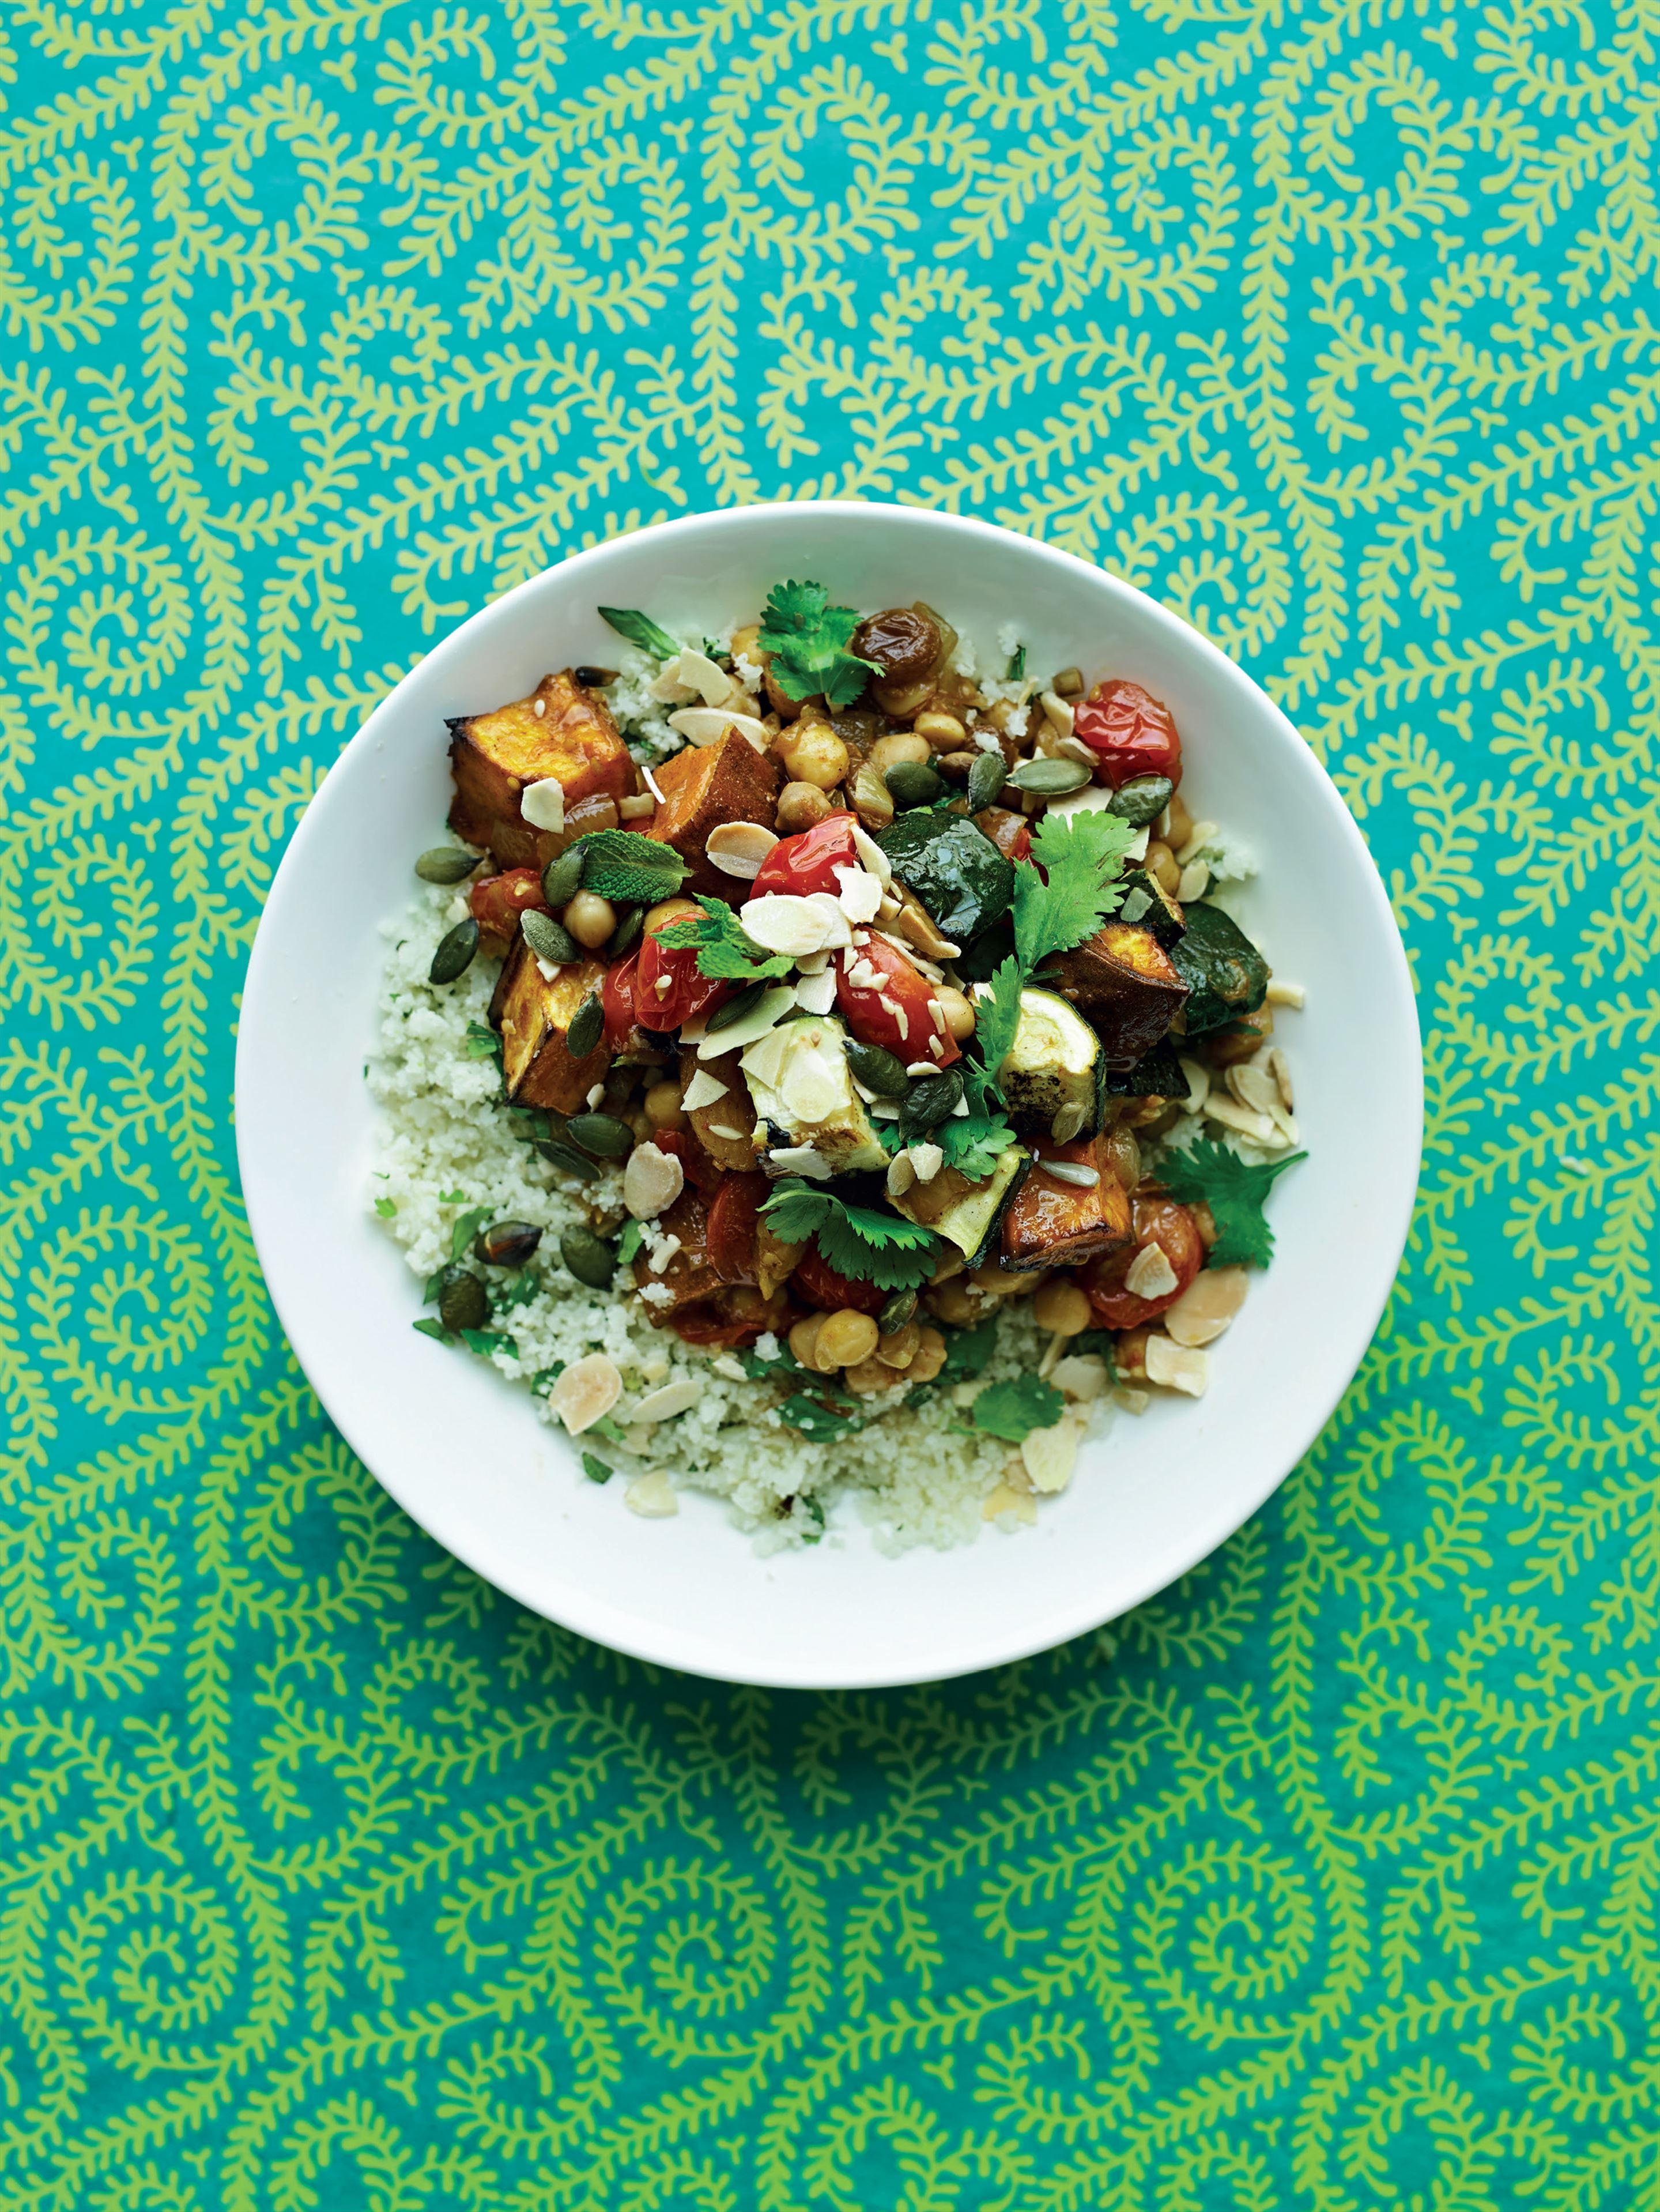 North African tagine with cauliflower ‘couscous’